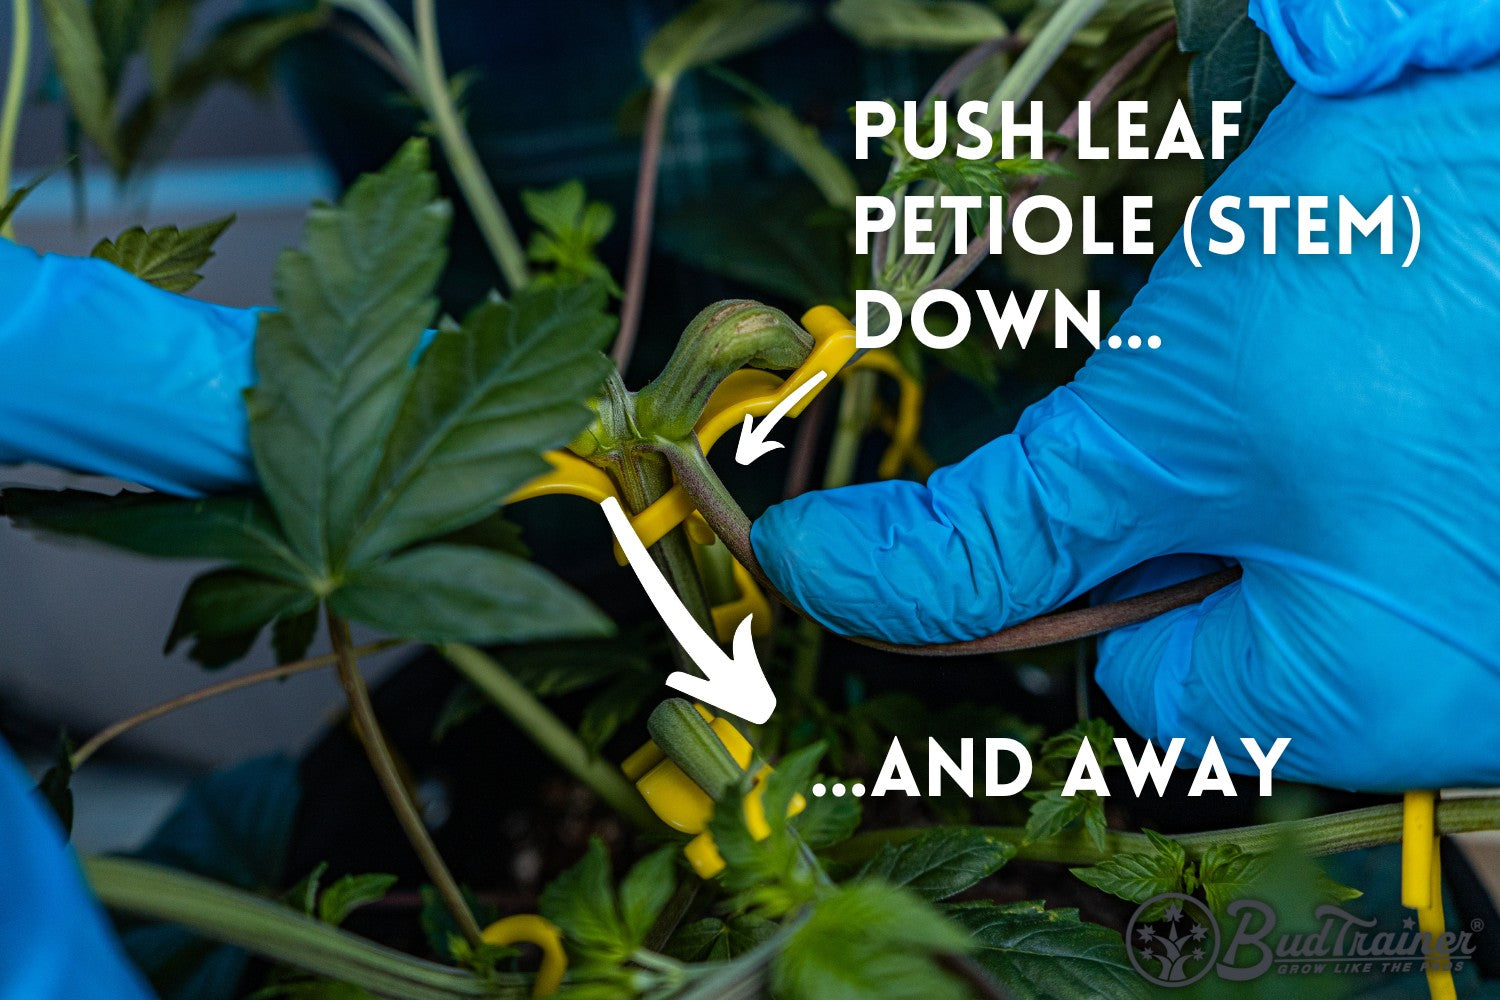 Blue-gloved hands training a cannabis plant using yellow bud clips, pushing the leaf petiole (stem) down and away. The text overlay guides, “Push leaf petiole (stem) down…and away,” demonstrating the training technique against a backdrop of lush, green foliage.